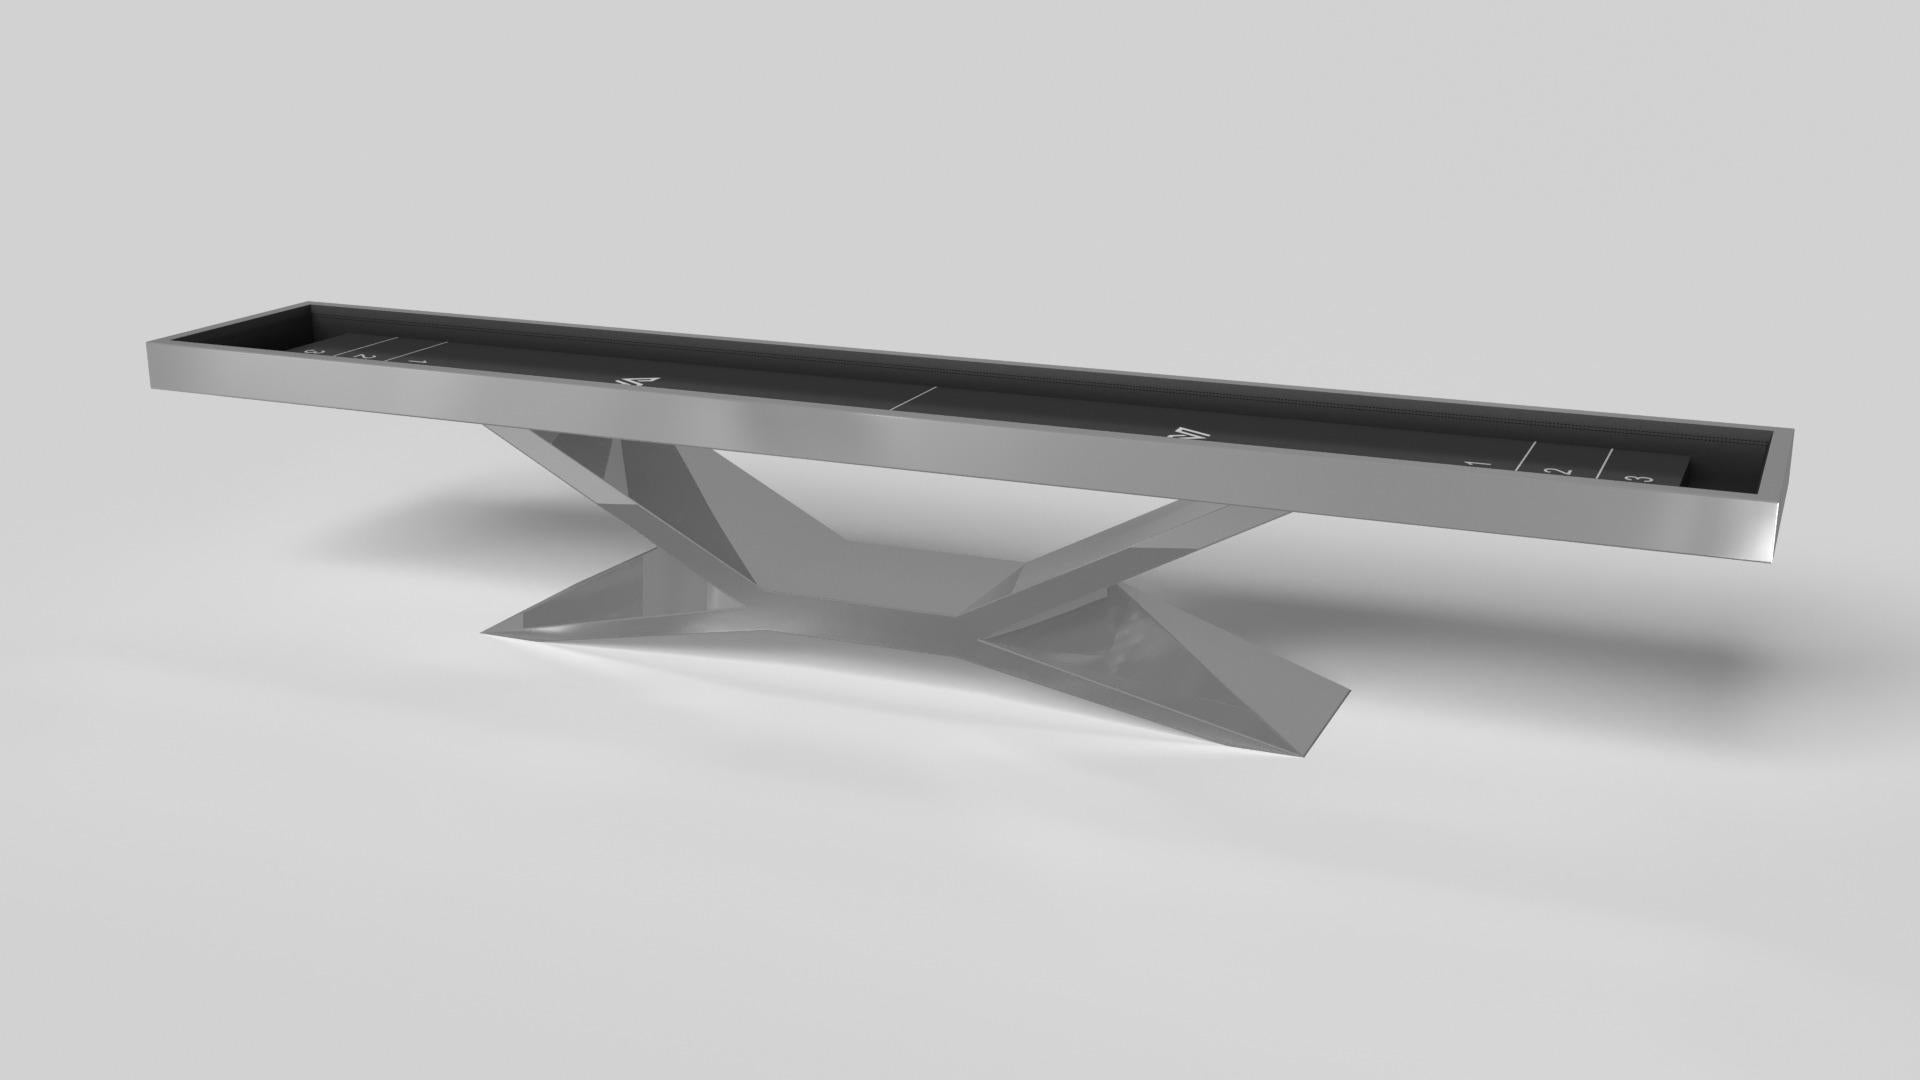 In chrome, the Kors shuffleboard table is a superior example of contrasting geometric forms. This table features an angular base that highlights the beauty of negative space from the front view. From the side view, it offers a completely different